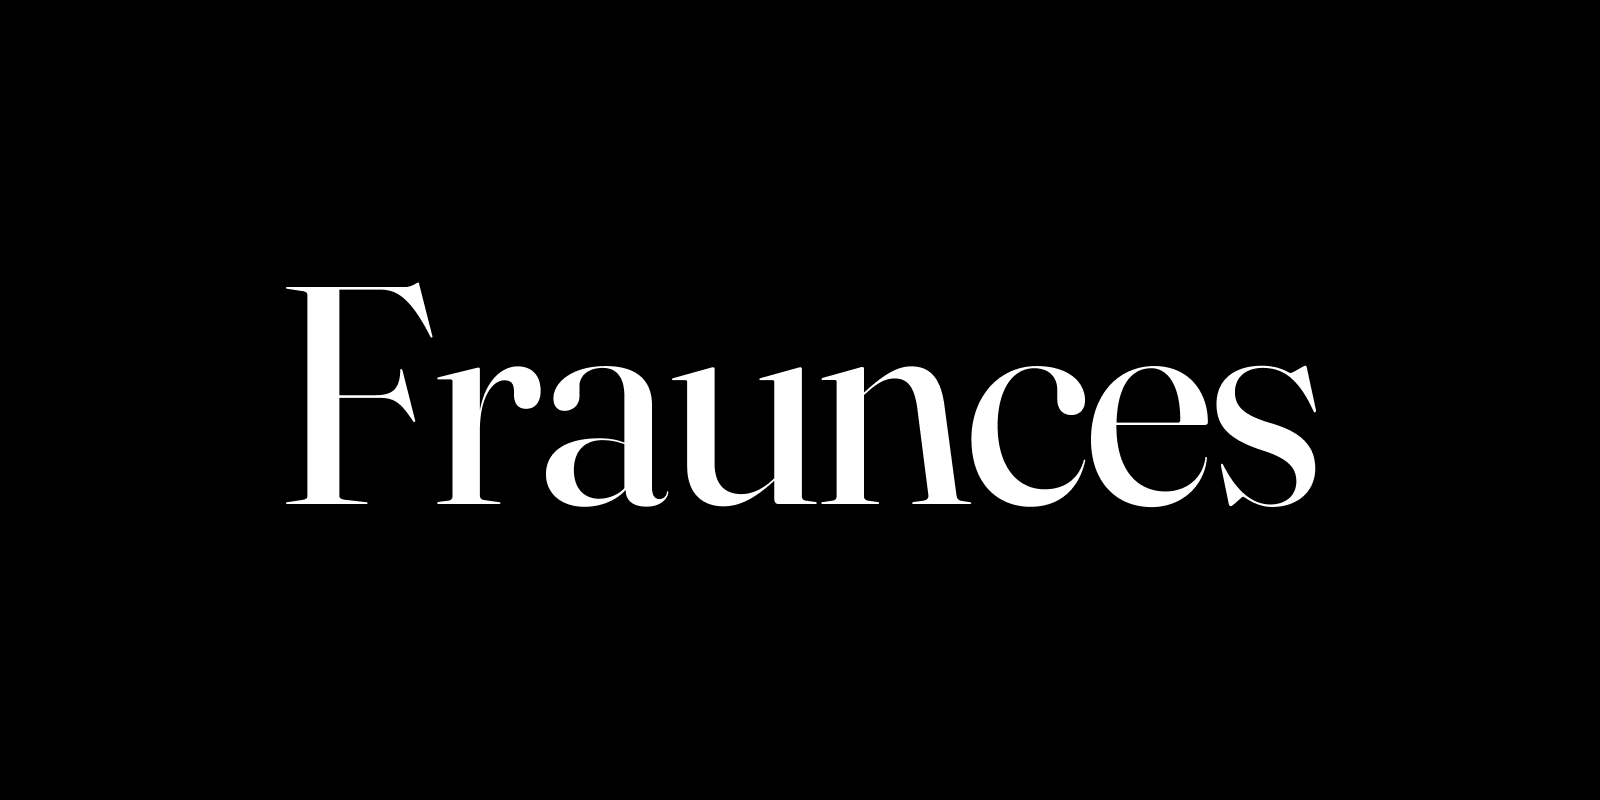 Fraunces by Undercase Type